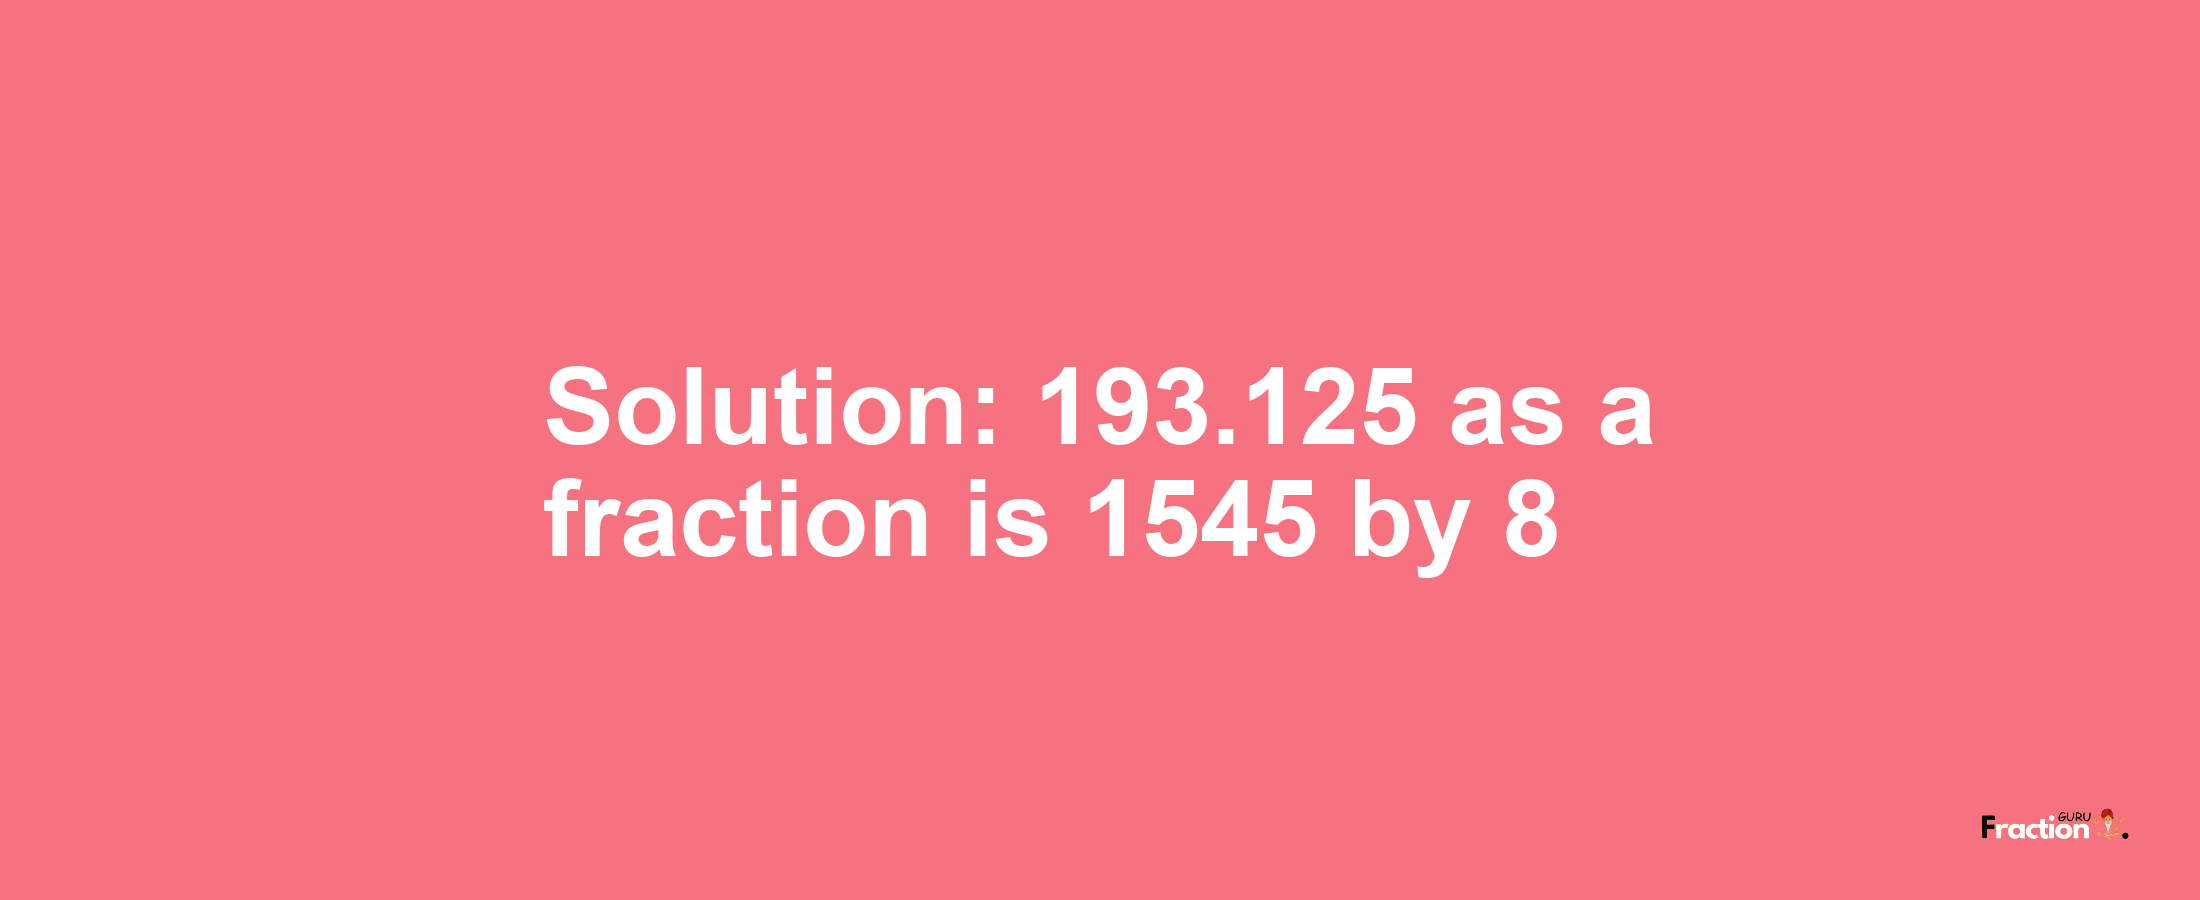 Solution:193.125 as a fraction is 1545/8